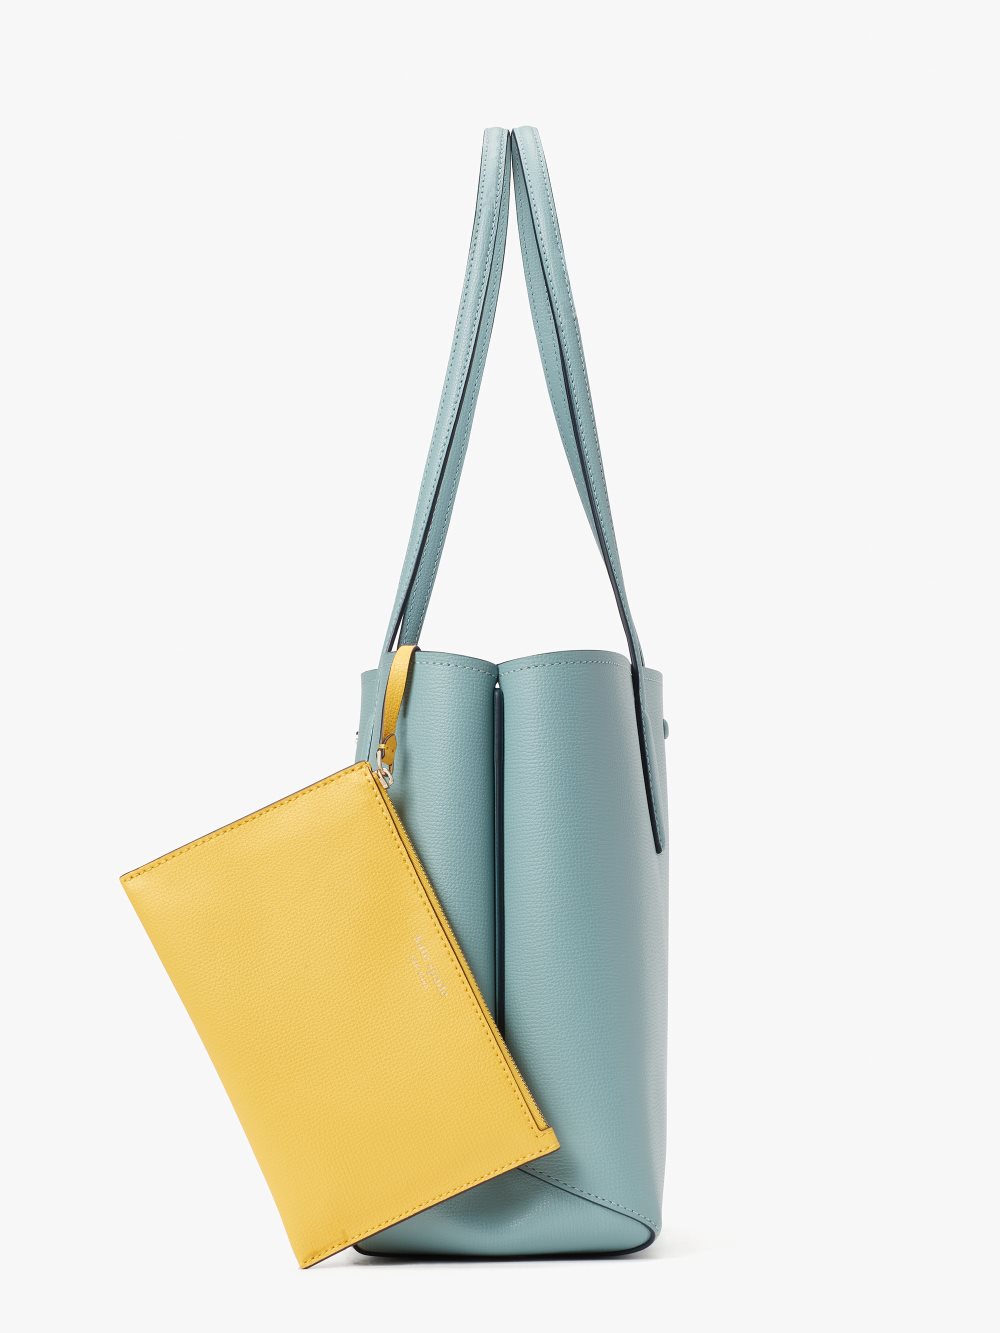 Women's agean teal all day large tote | Kate Spade